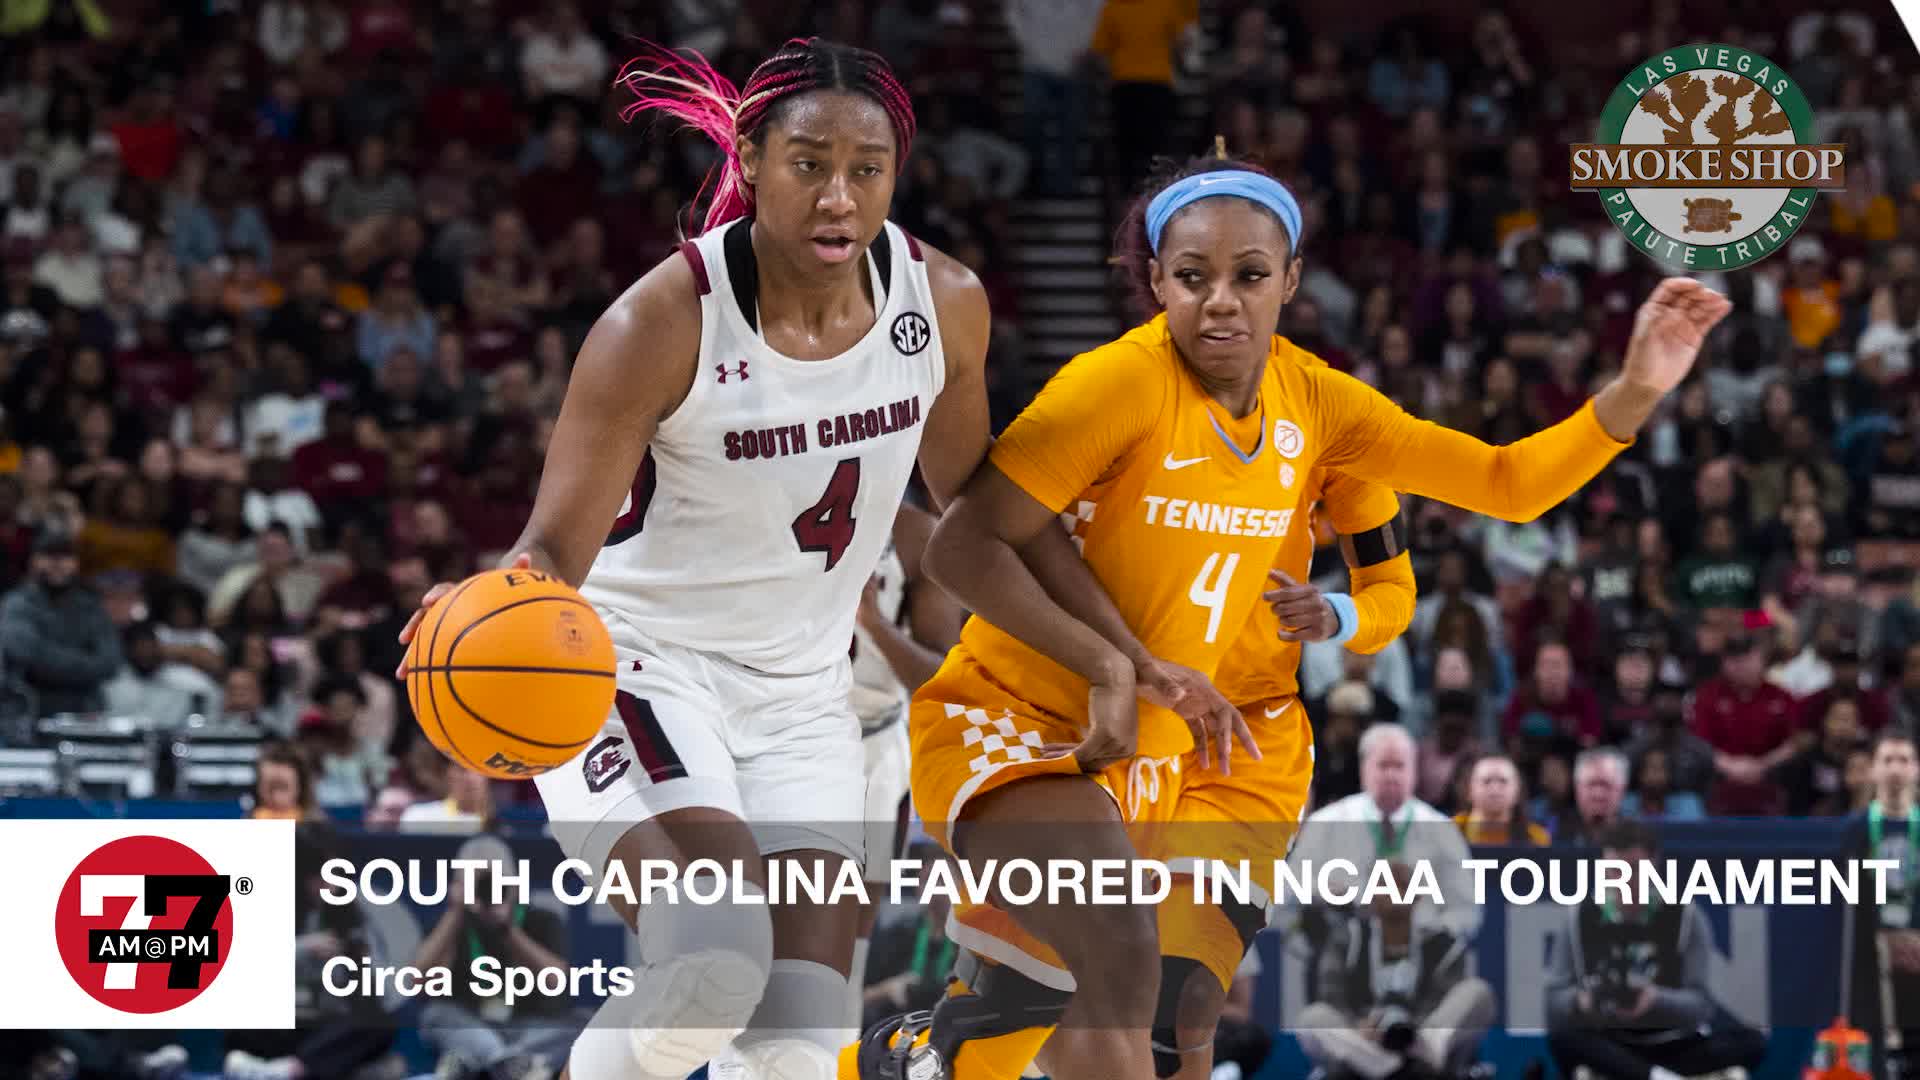 South Carolina favored in NCAA Tournament